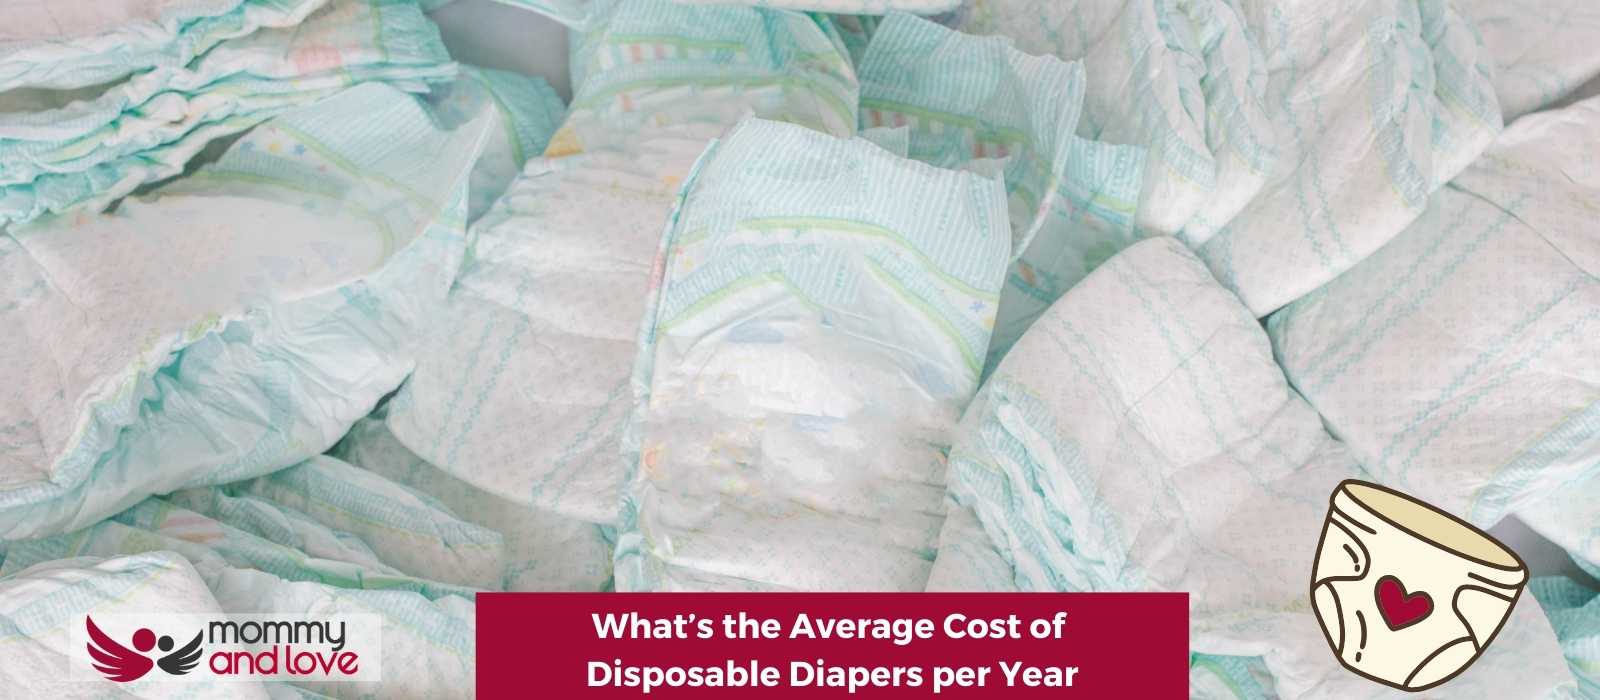 What’s the Average Cost of Disposable Diapers per Year